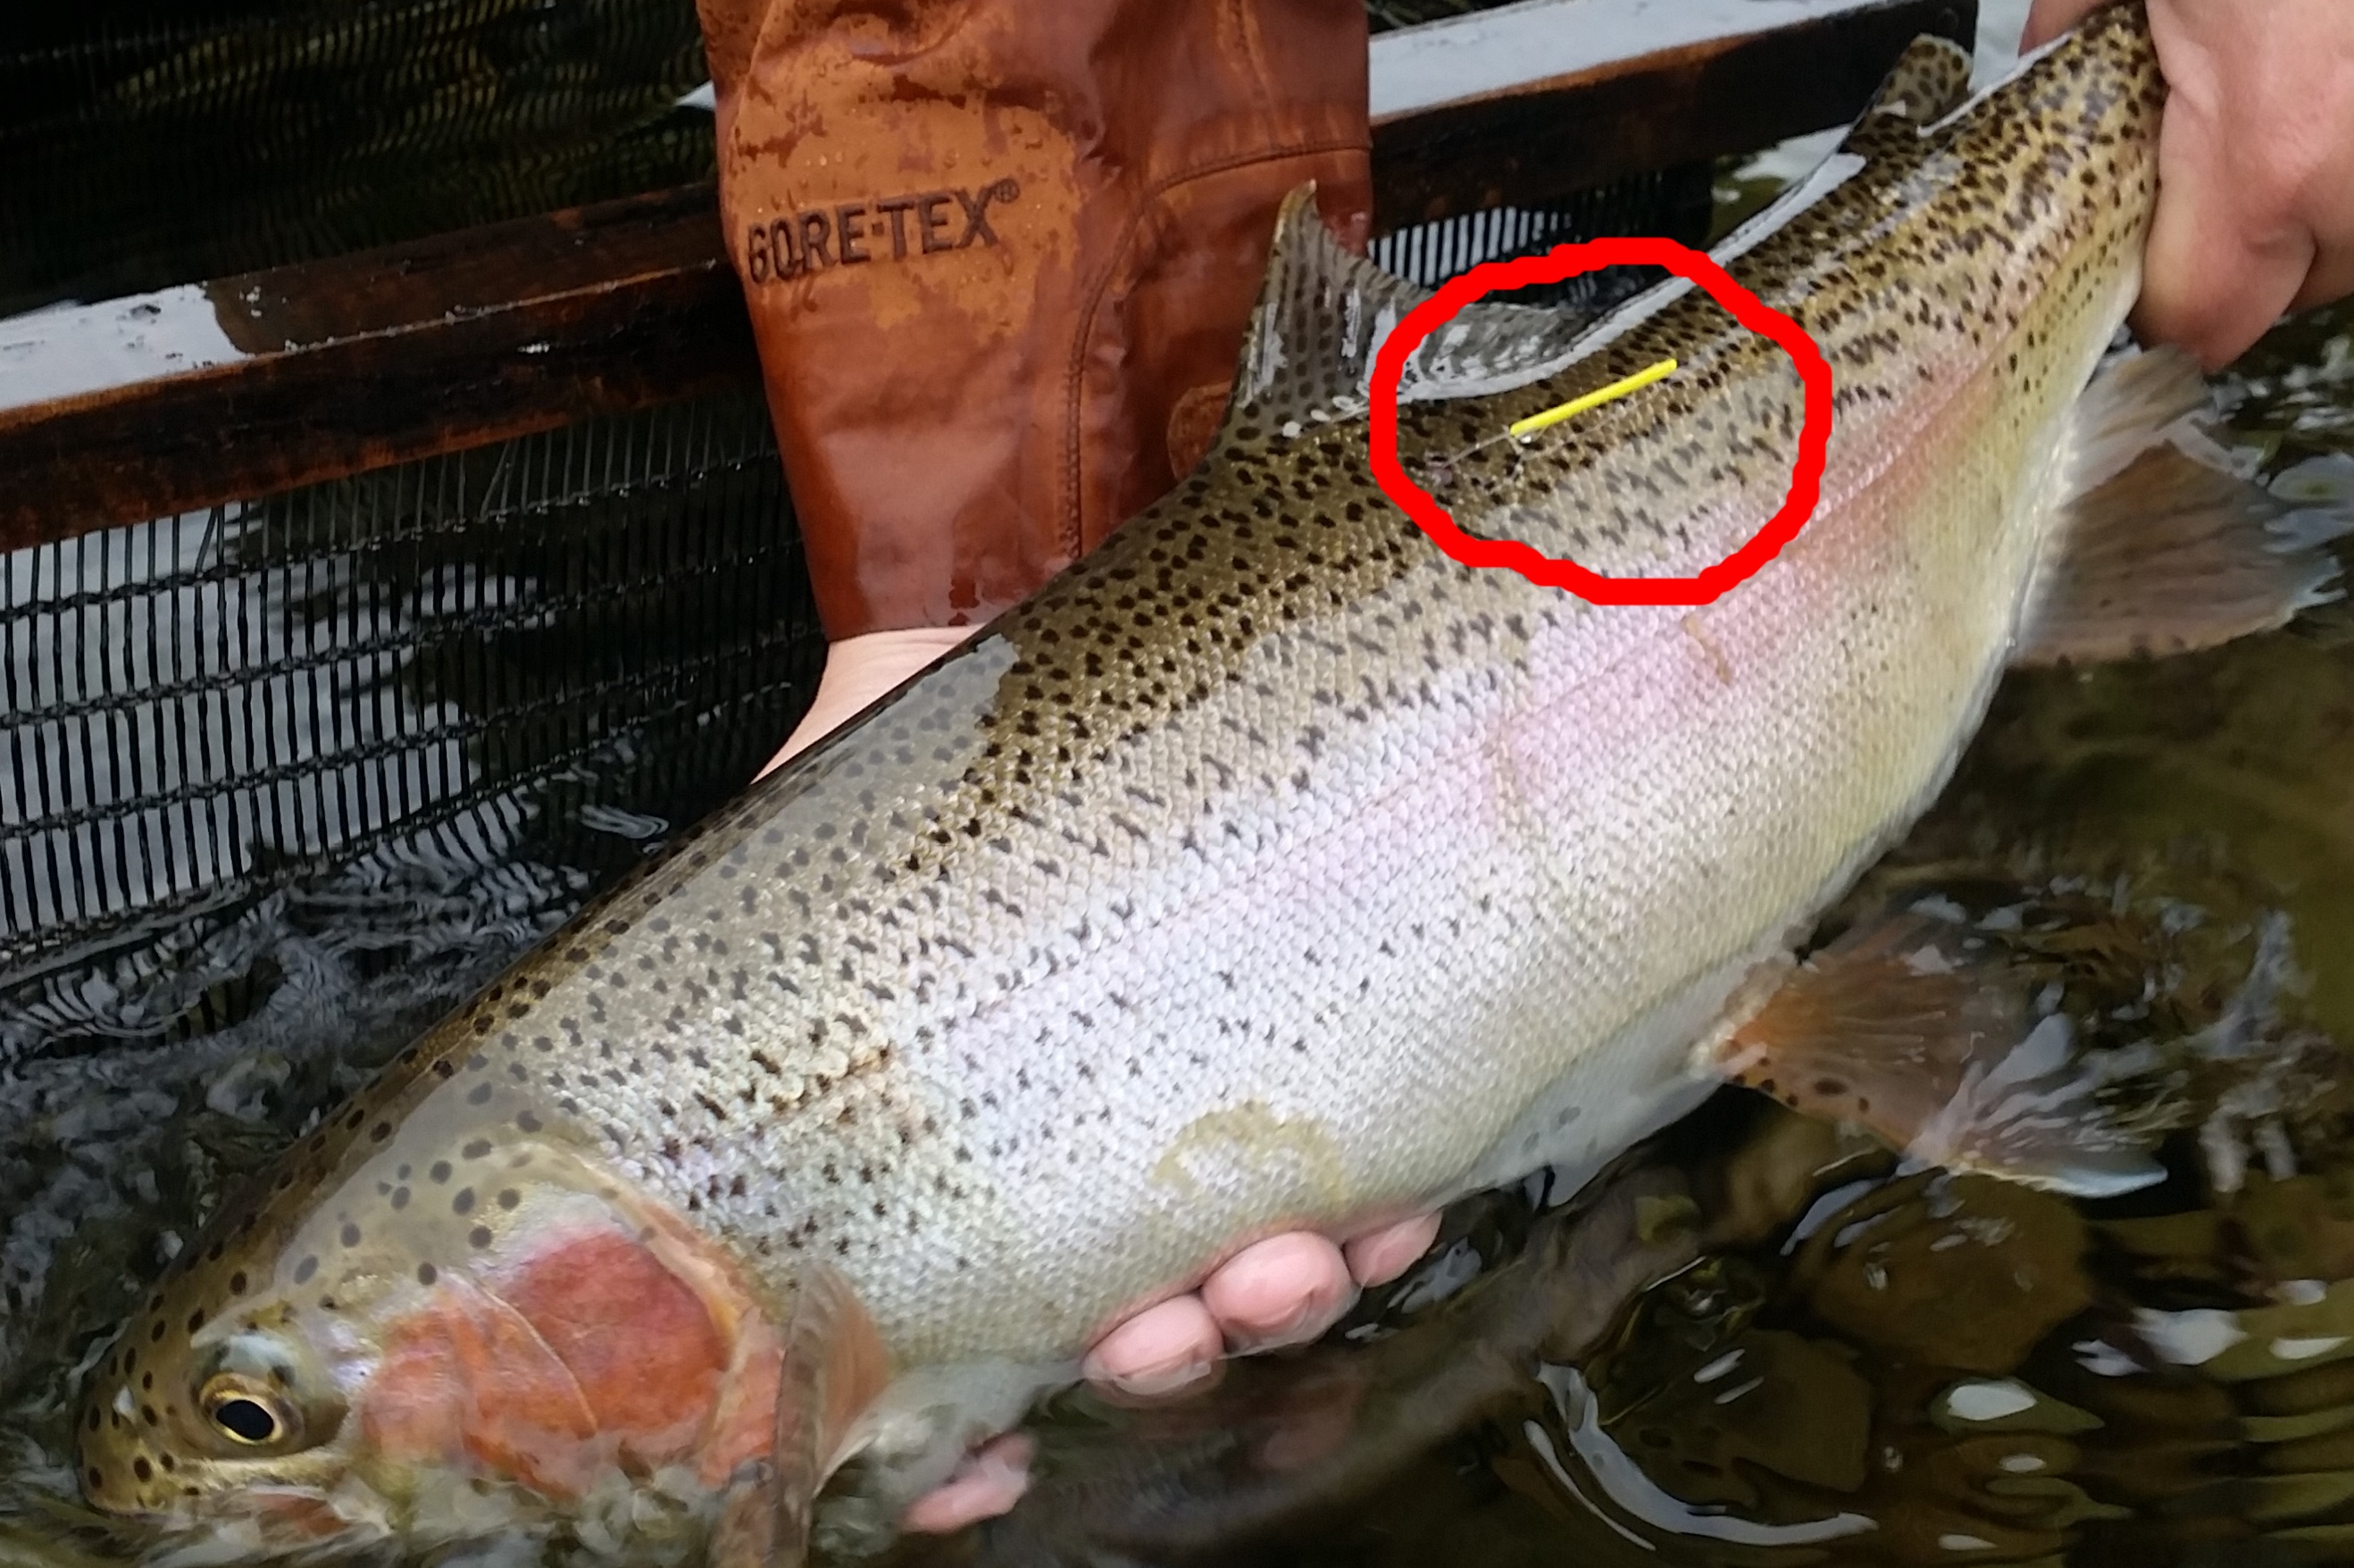 RL CSI FEB 2 A tagged rainbow trout with the yellow tag shown in the red circle